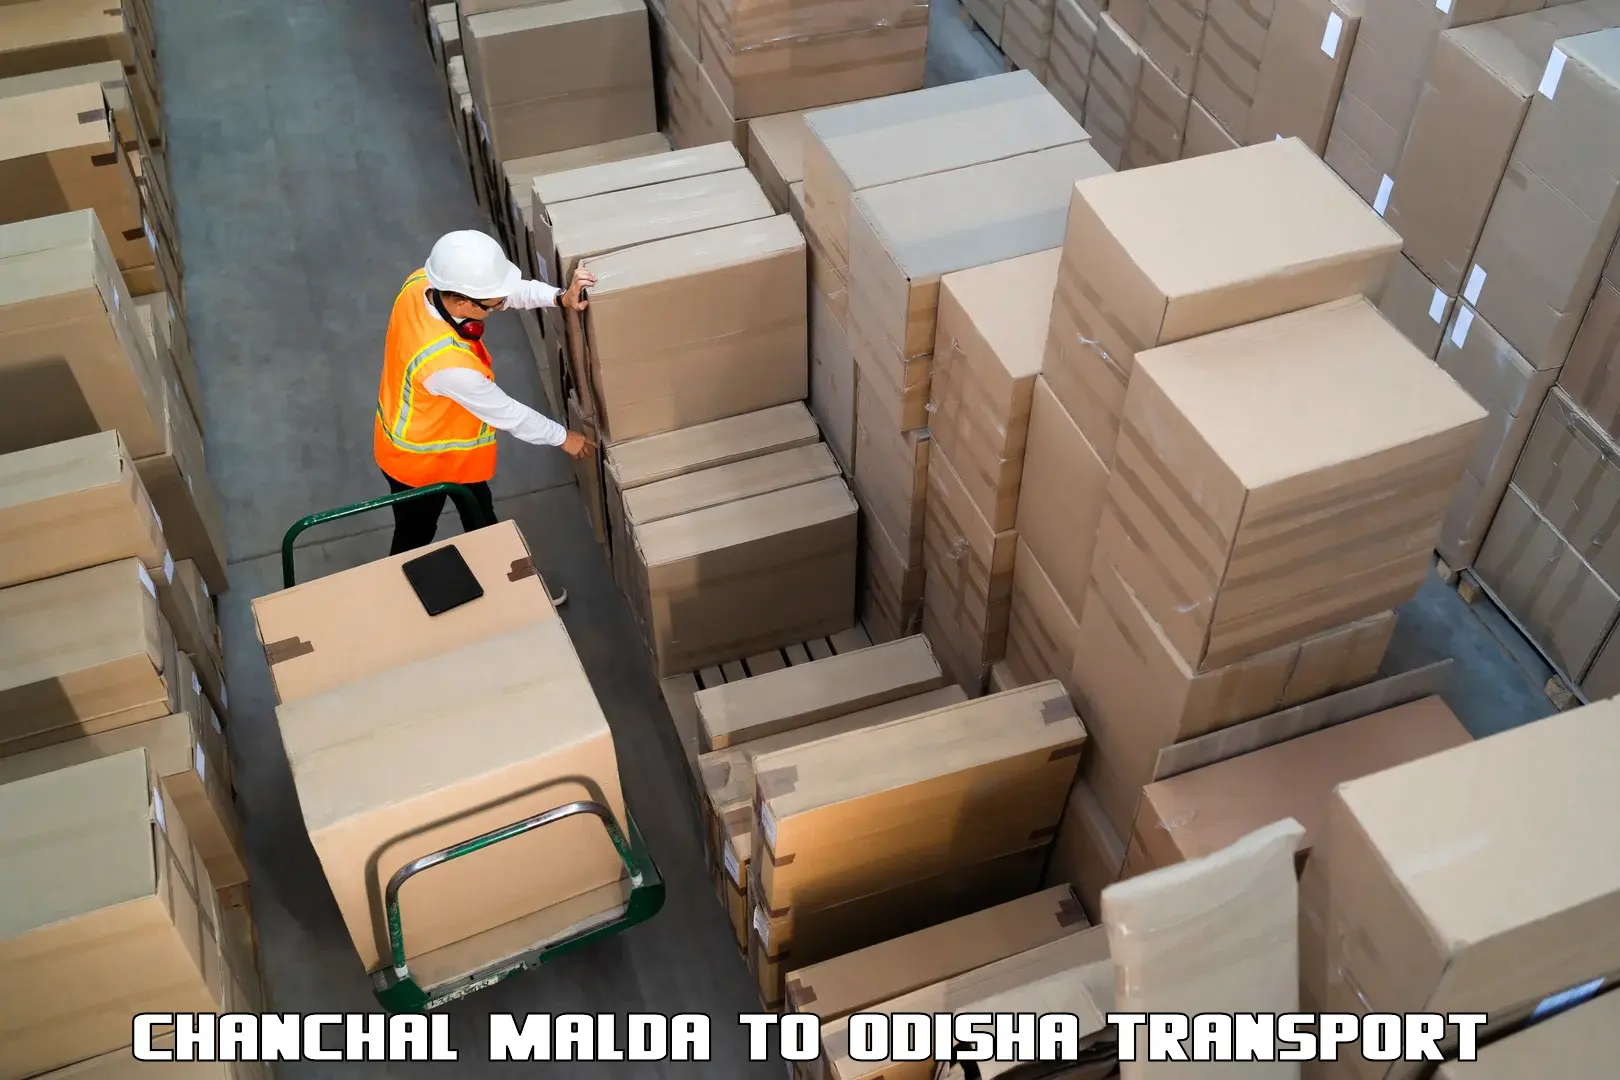 Container transport service Chanchal Malda to Garjanpur